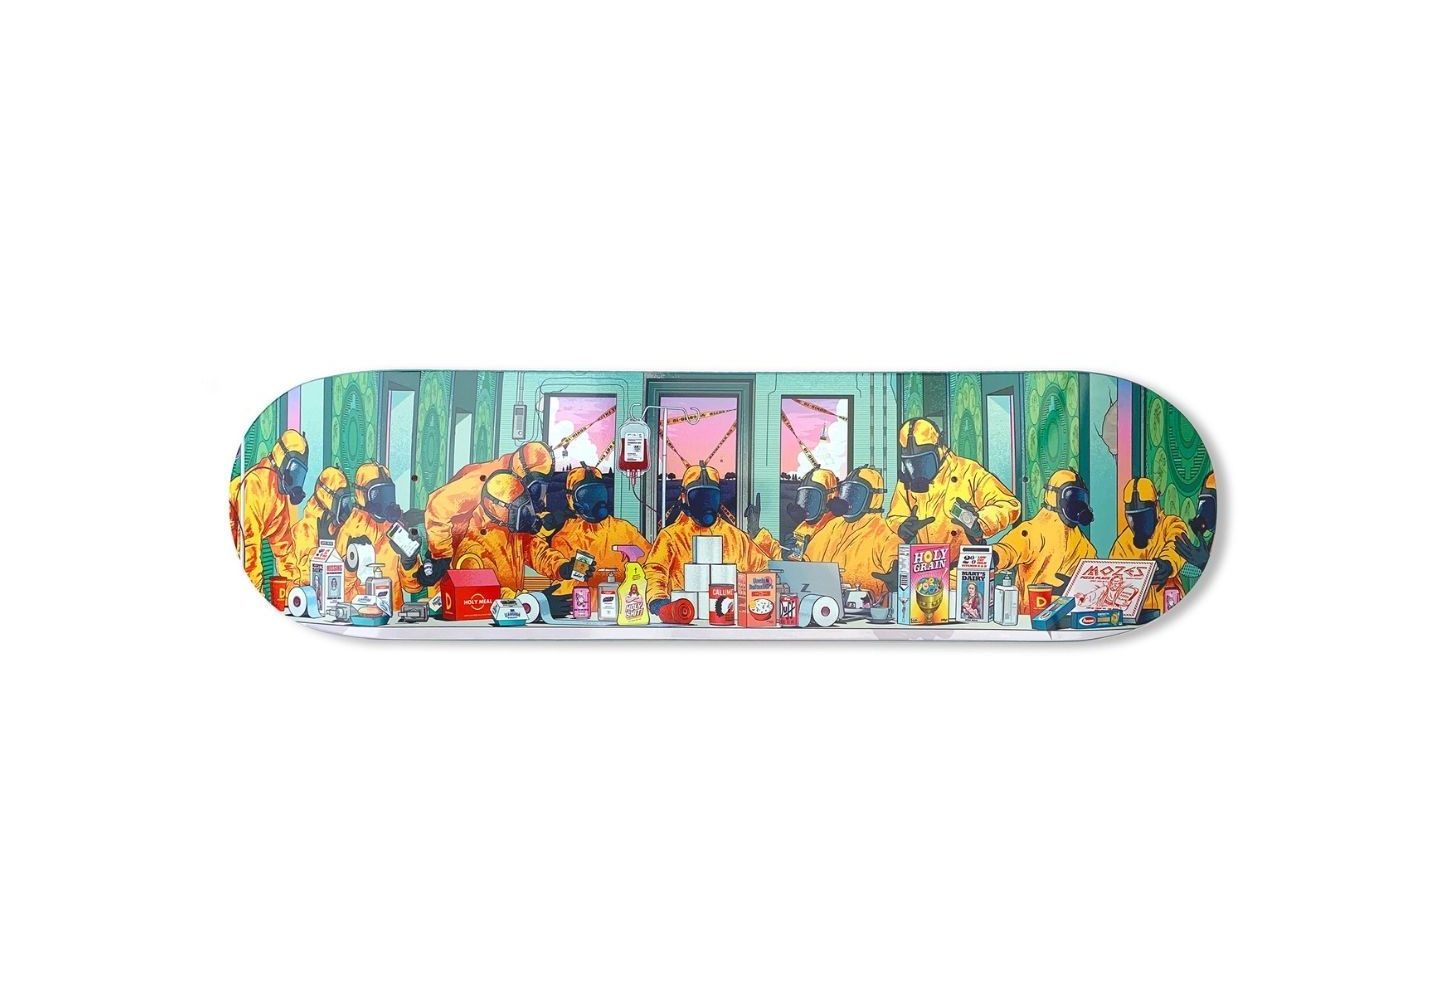 The Last Supper Skateboard By Musketon 7